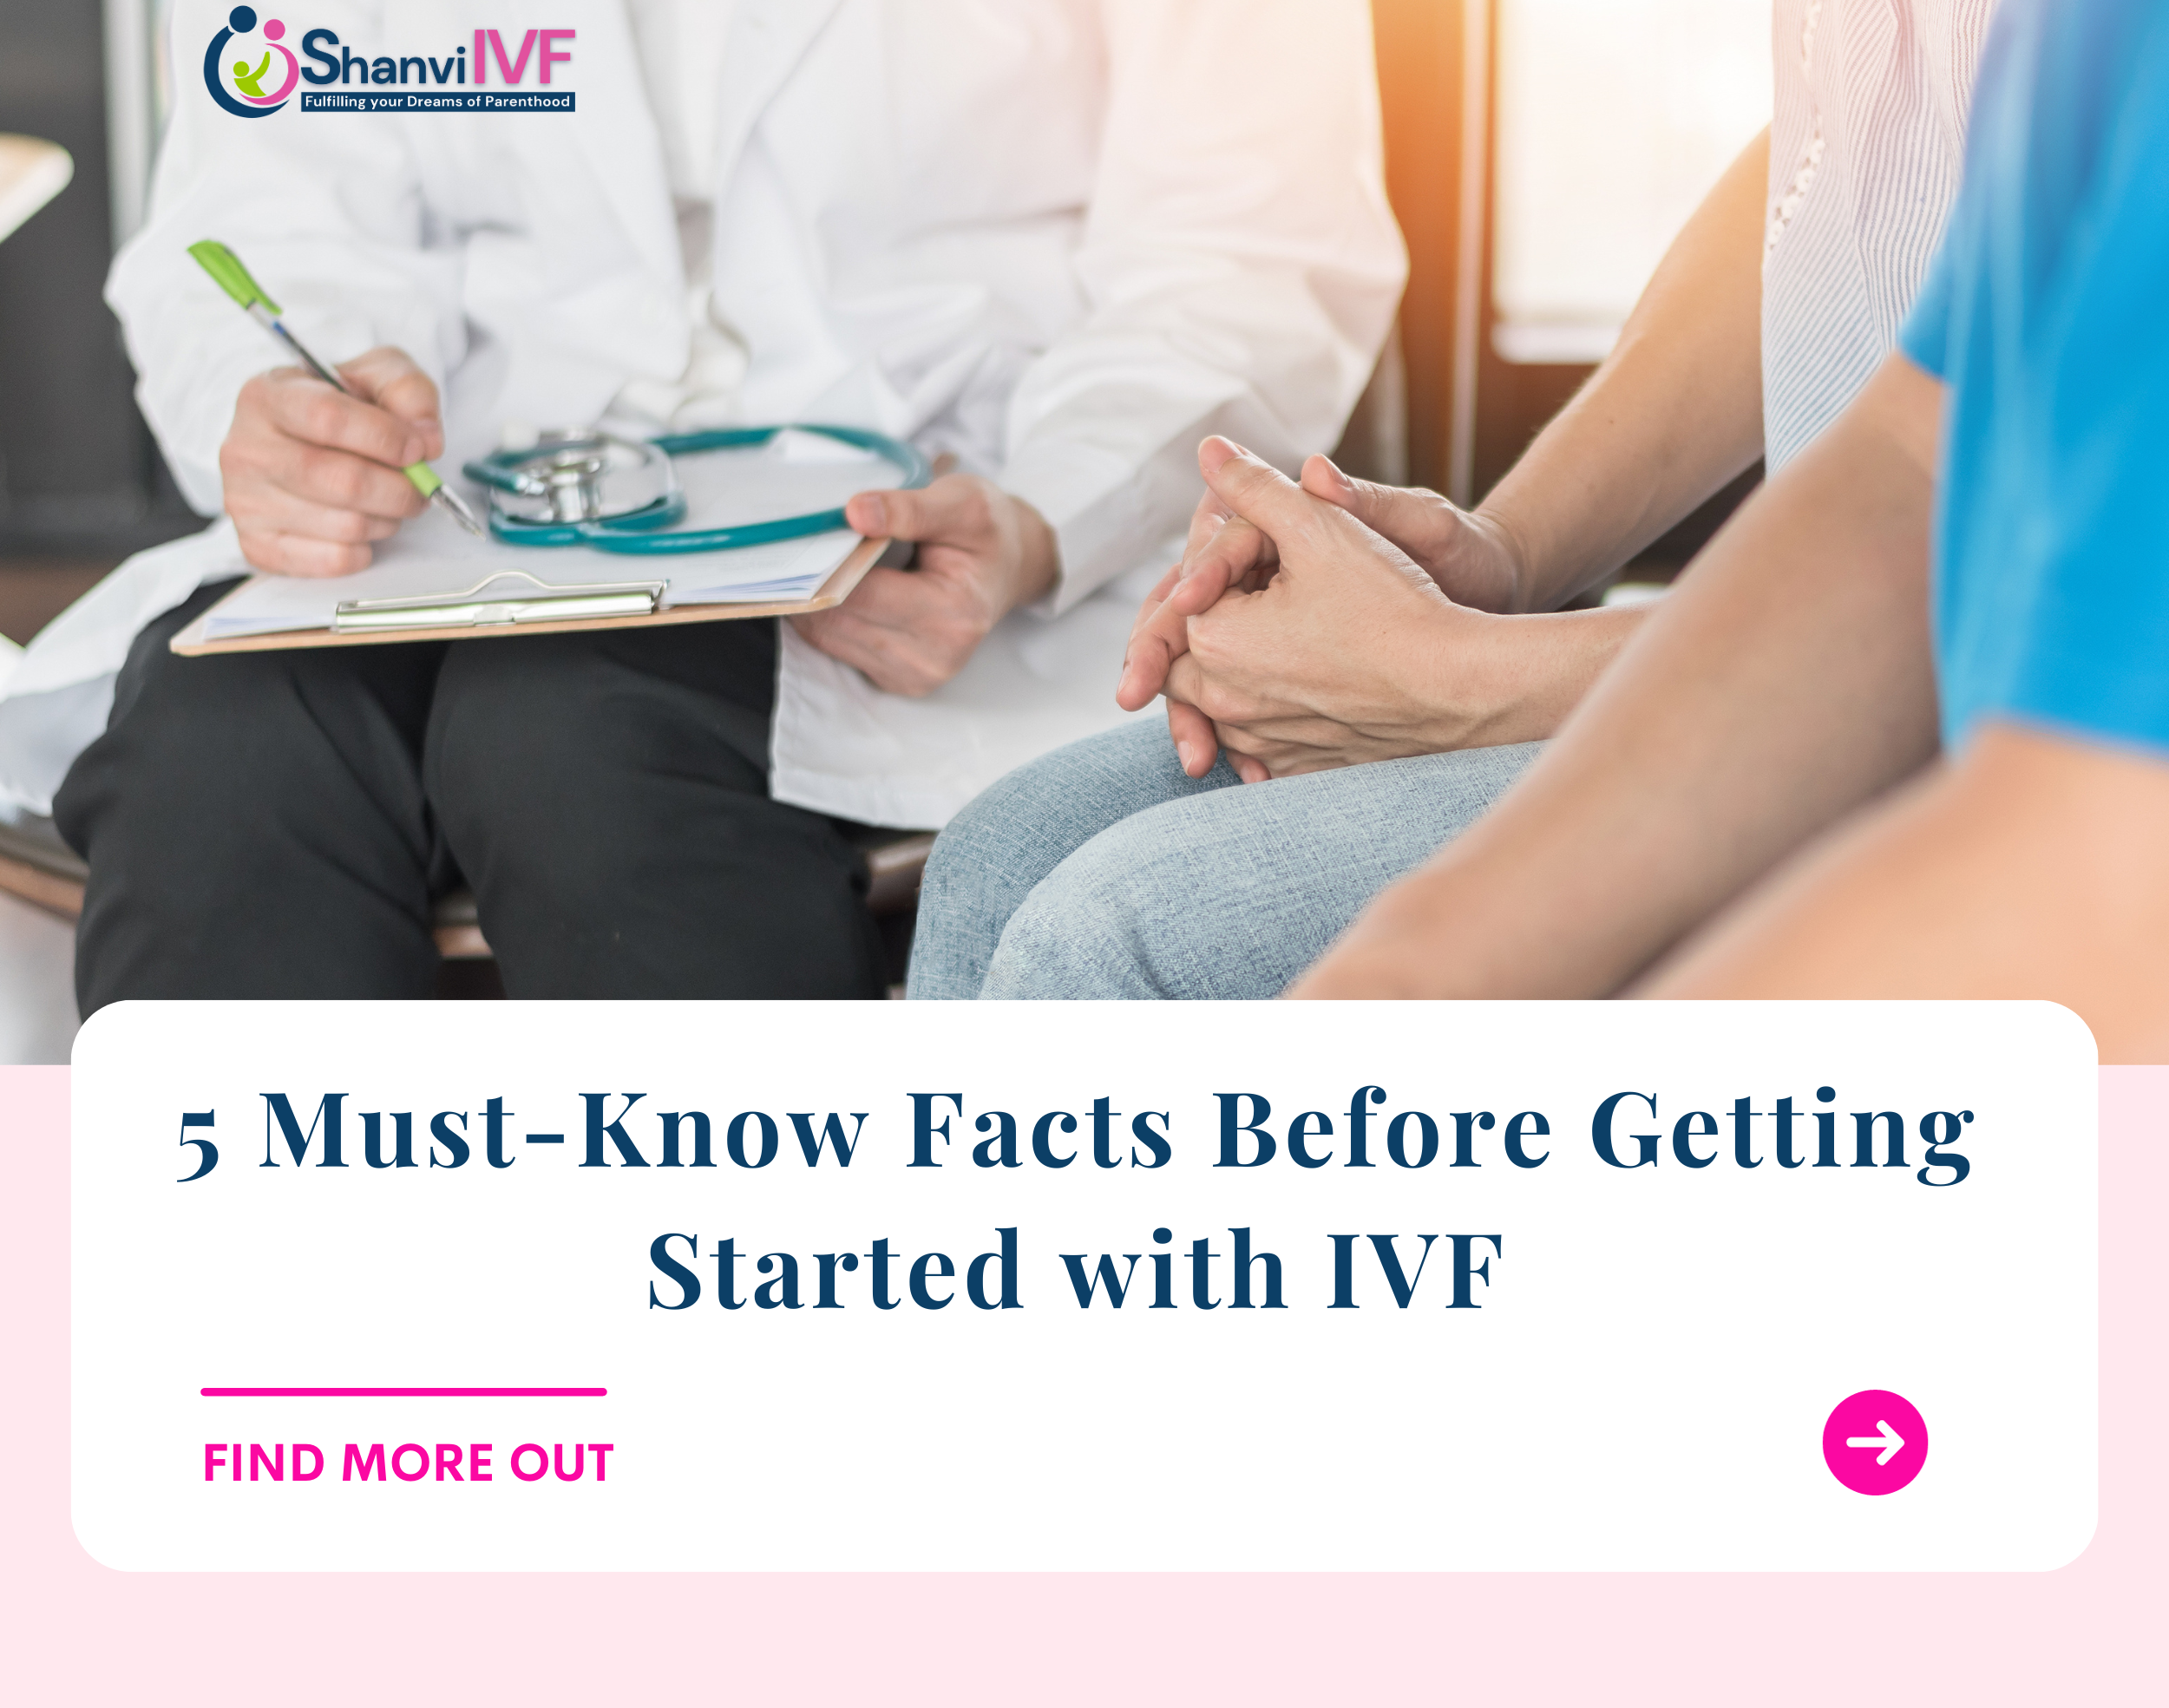 5 Must-Known Facts Before Getting Started with IVF